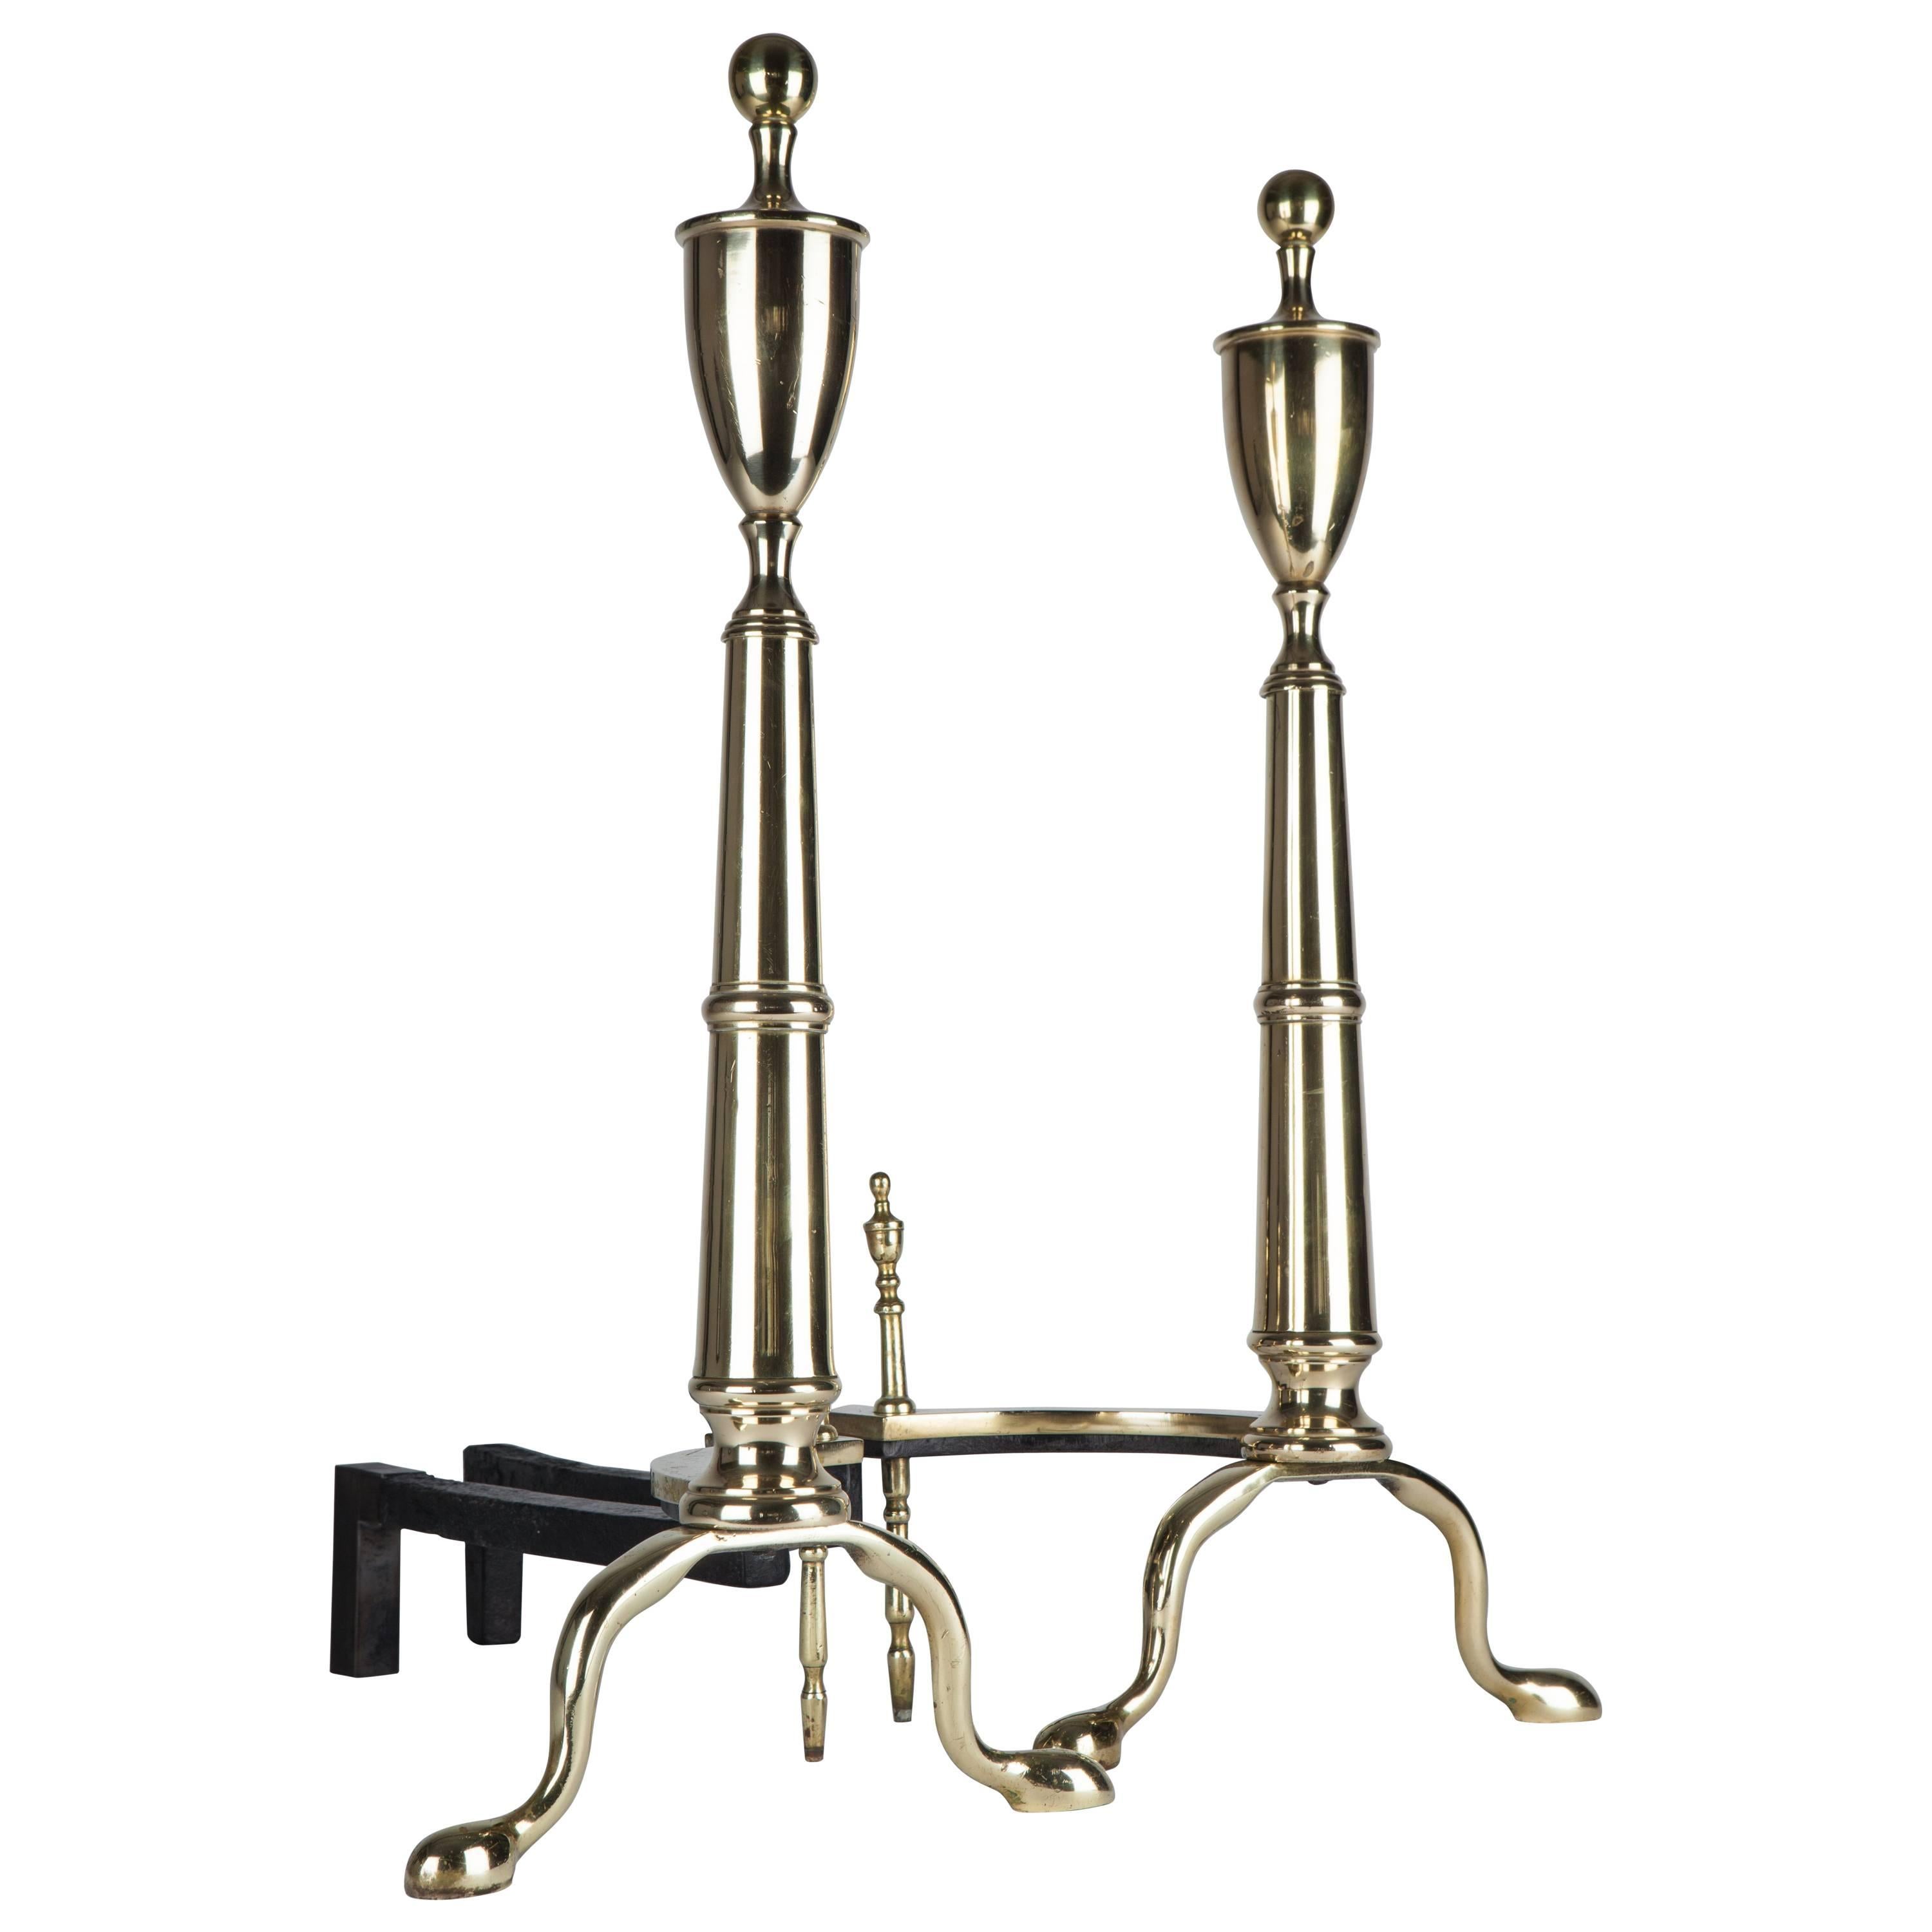 Brass Andirons with Urn Finials and Pad Feet, Circa 1920s